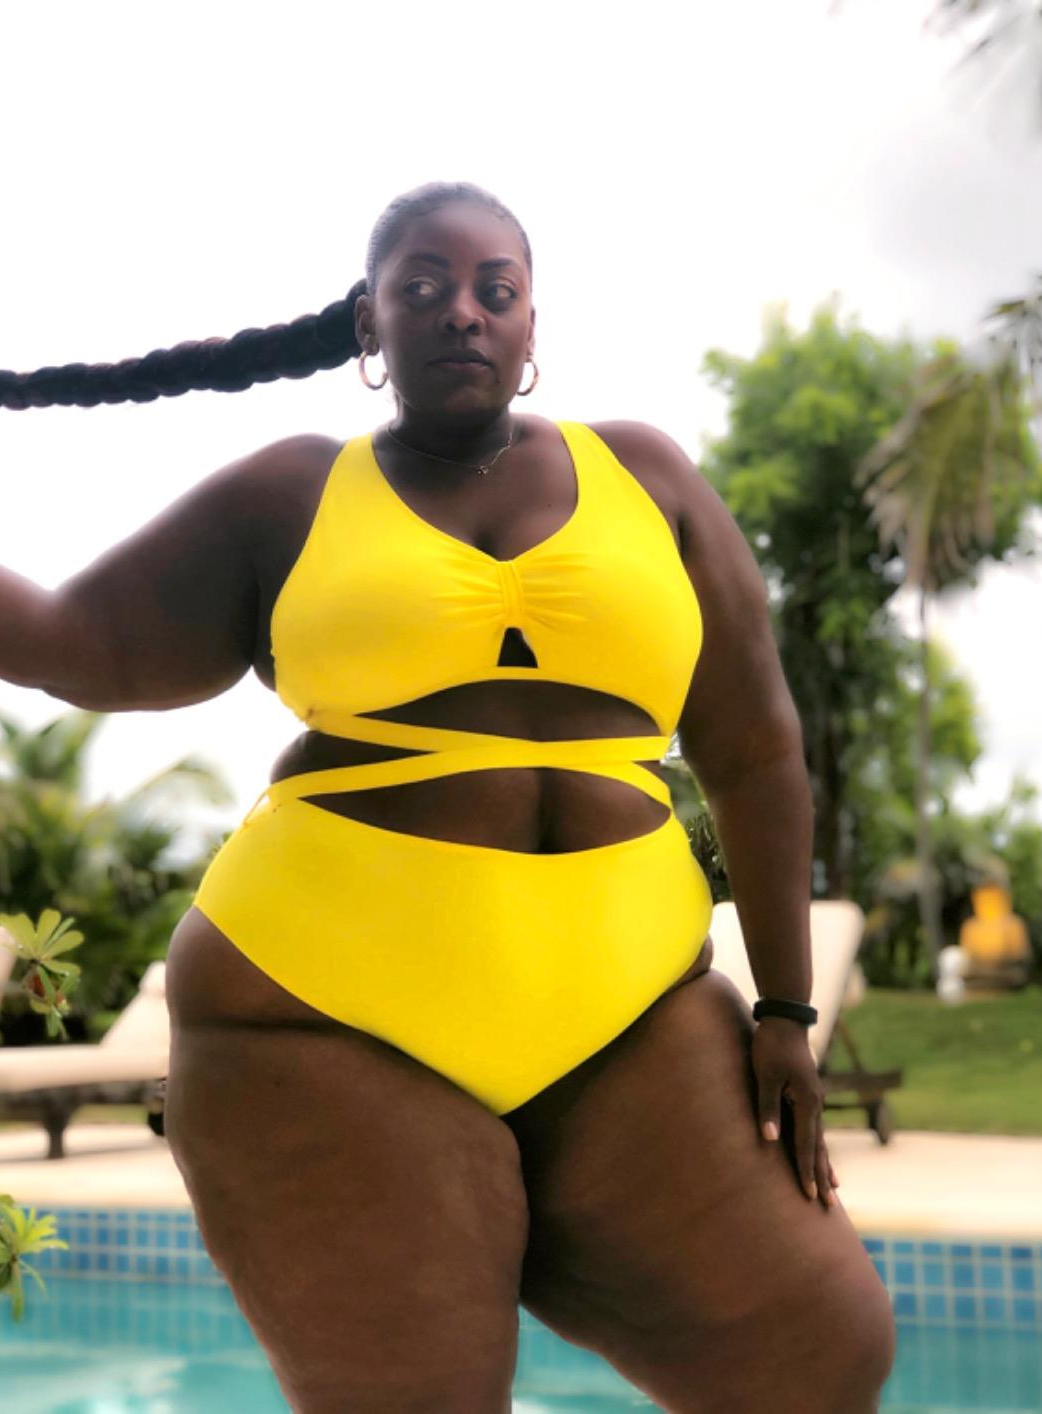 30 Comfortable Swimsuits That Look And Feel Amazing